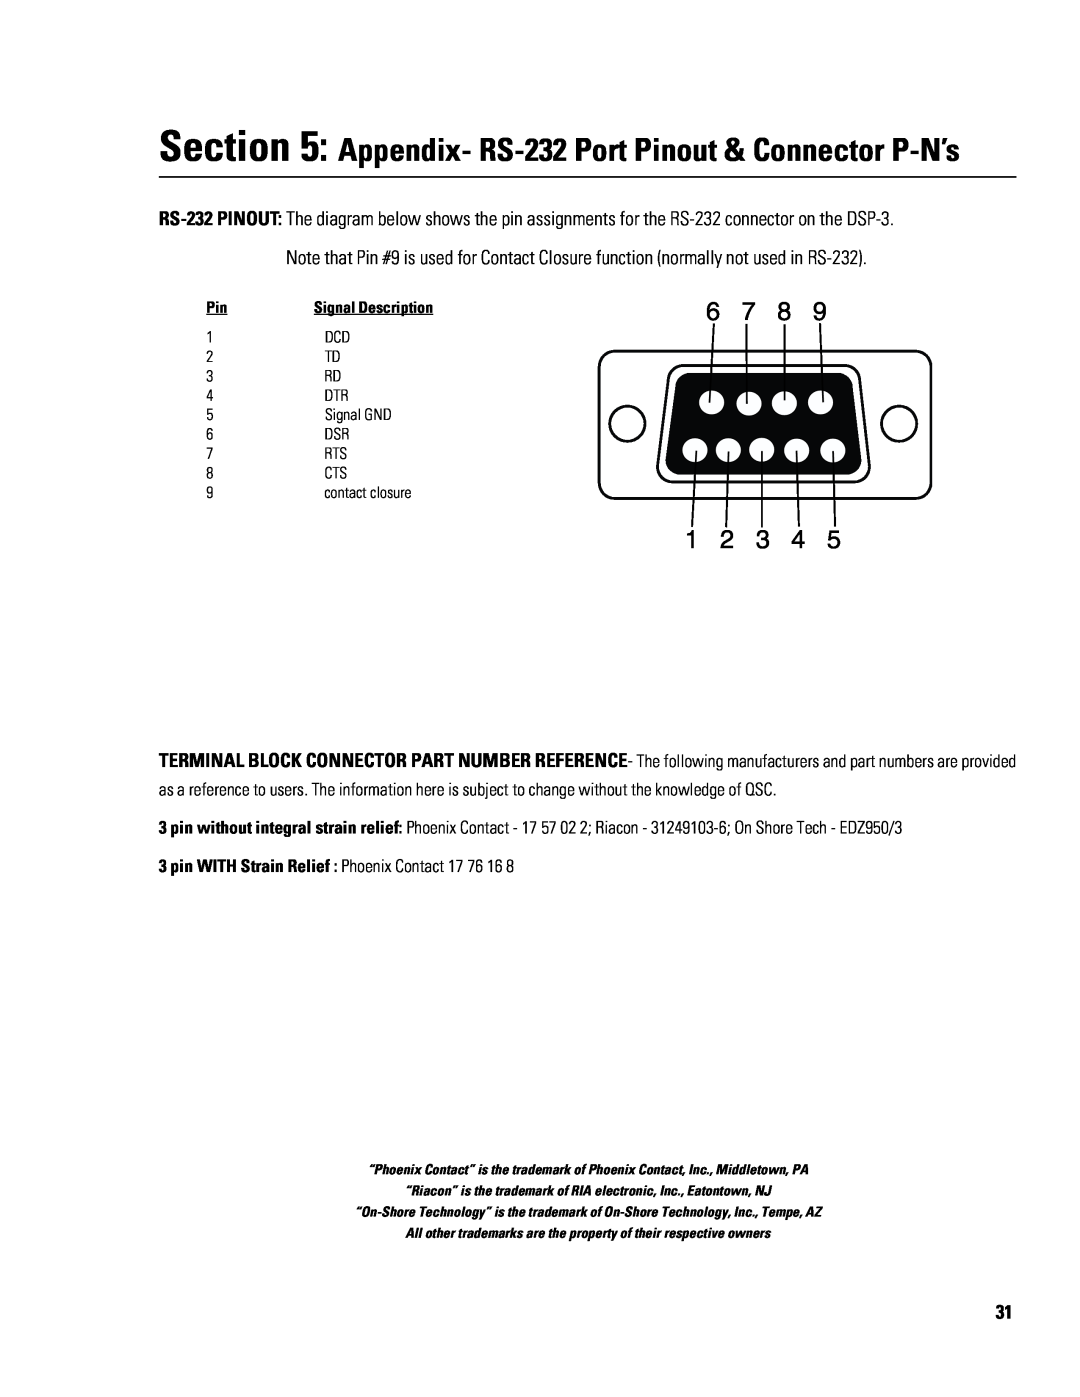 QSC Audio DSP-3 manual Appendix- RS-232 Port Pinout & Connector P-N’s, pin WITH Strain Relief Phoenix Contact 17 